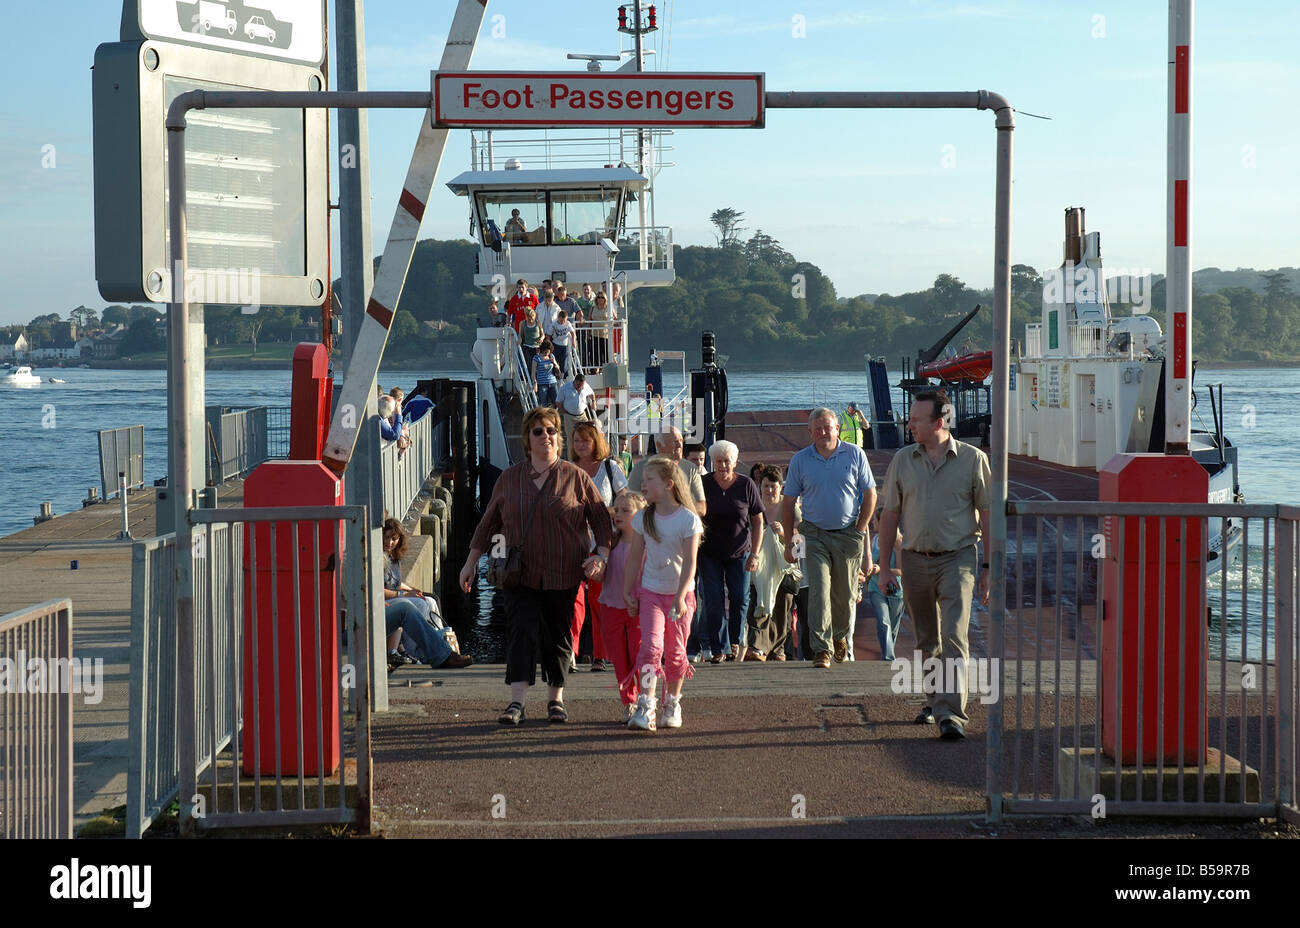 Foot passengers getting off the Strangford Ferry at Portaferry Strangford Lough Stock Photo